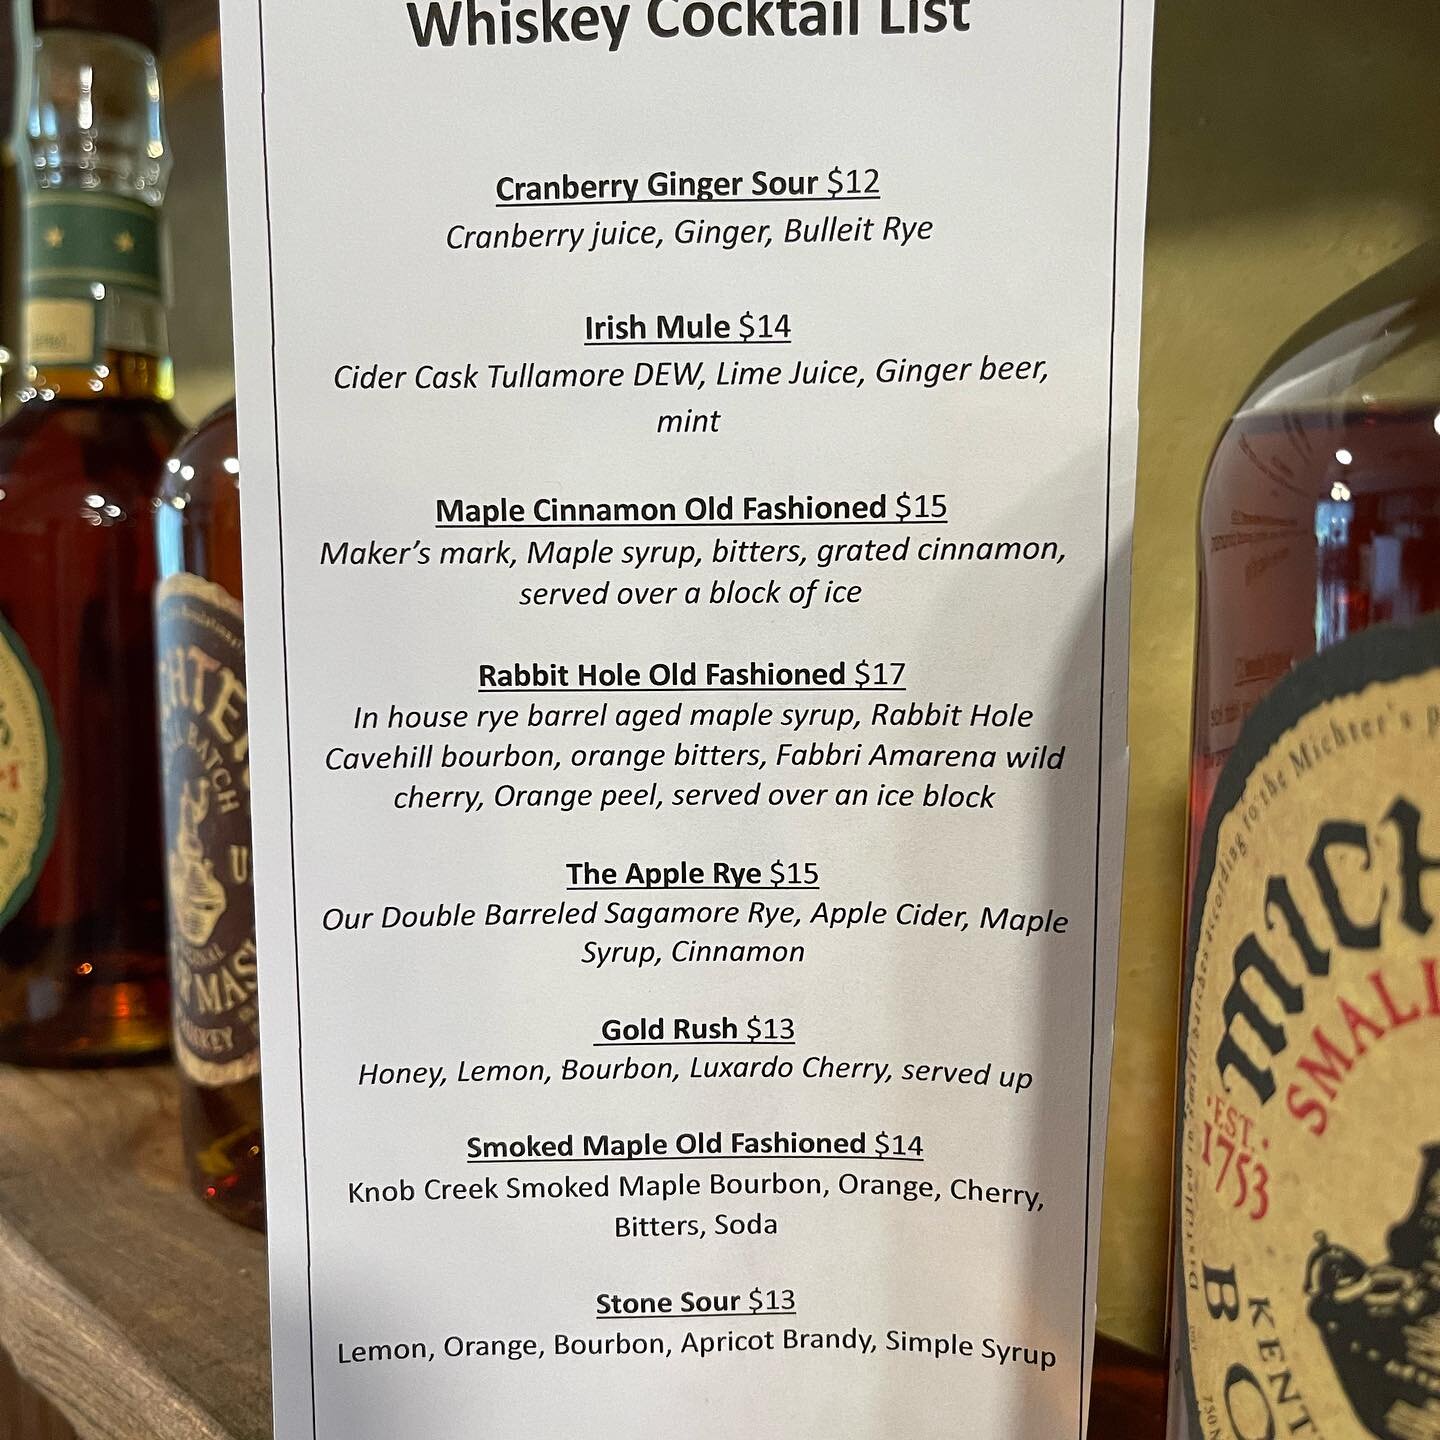 New this week to the whiskey bar! Basil Hayden, Four Roses, Bowman, and High West!